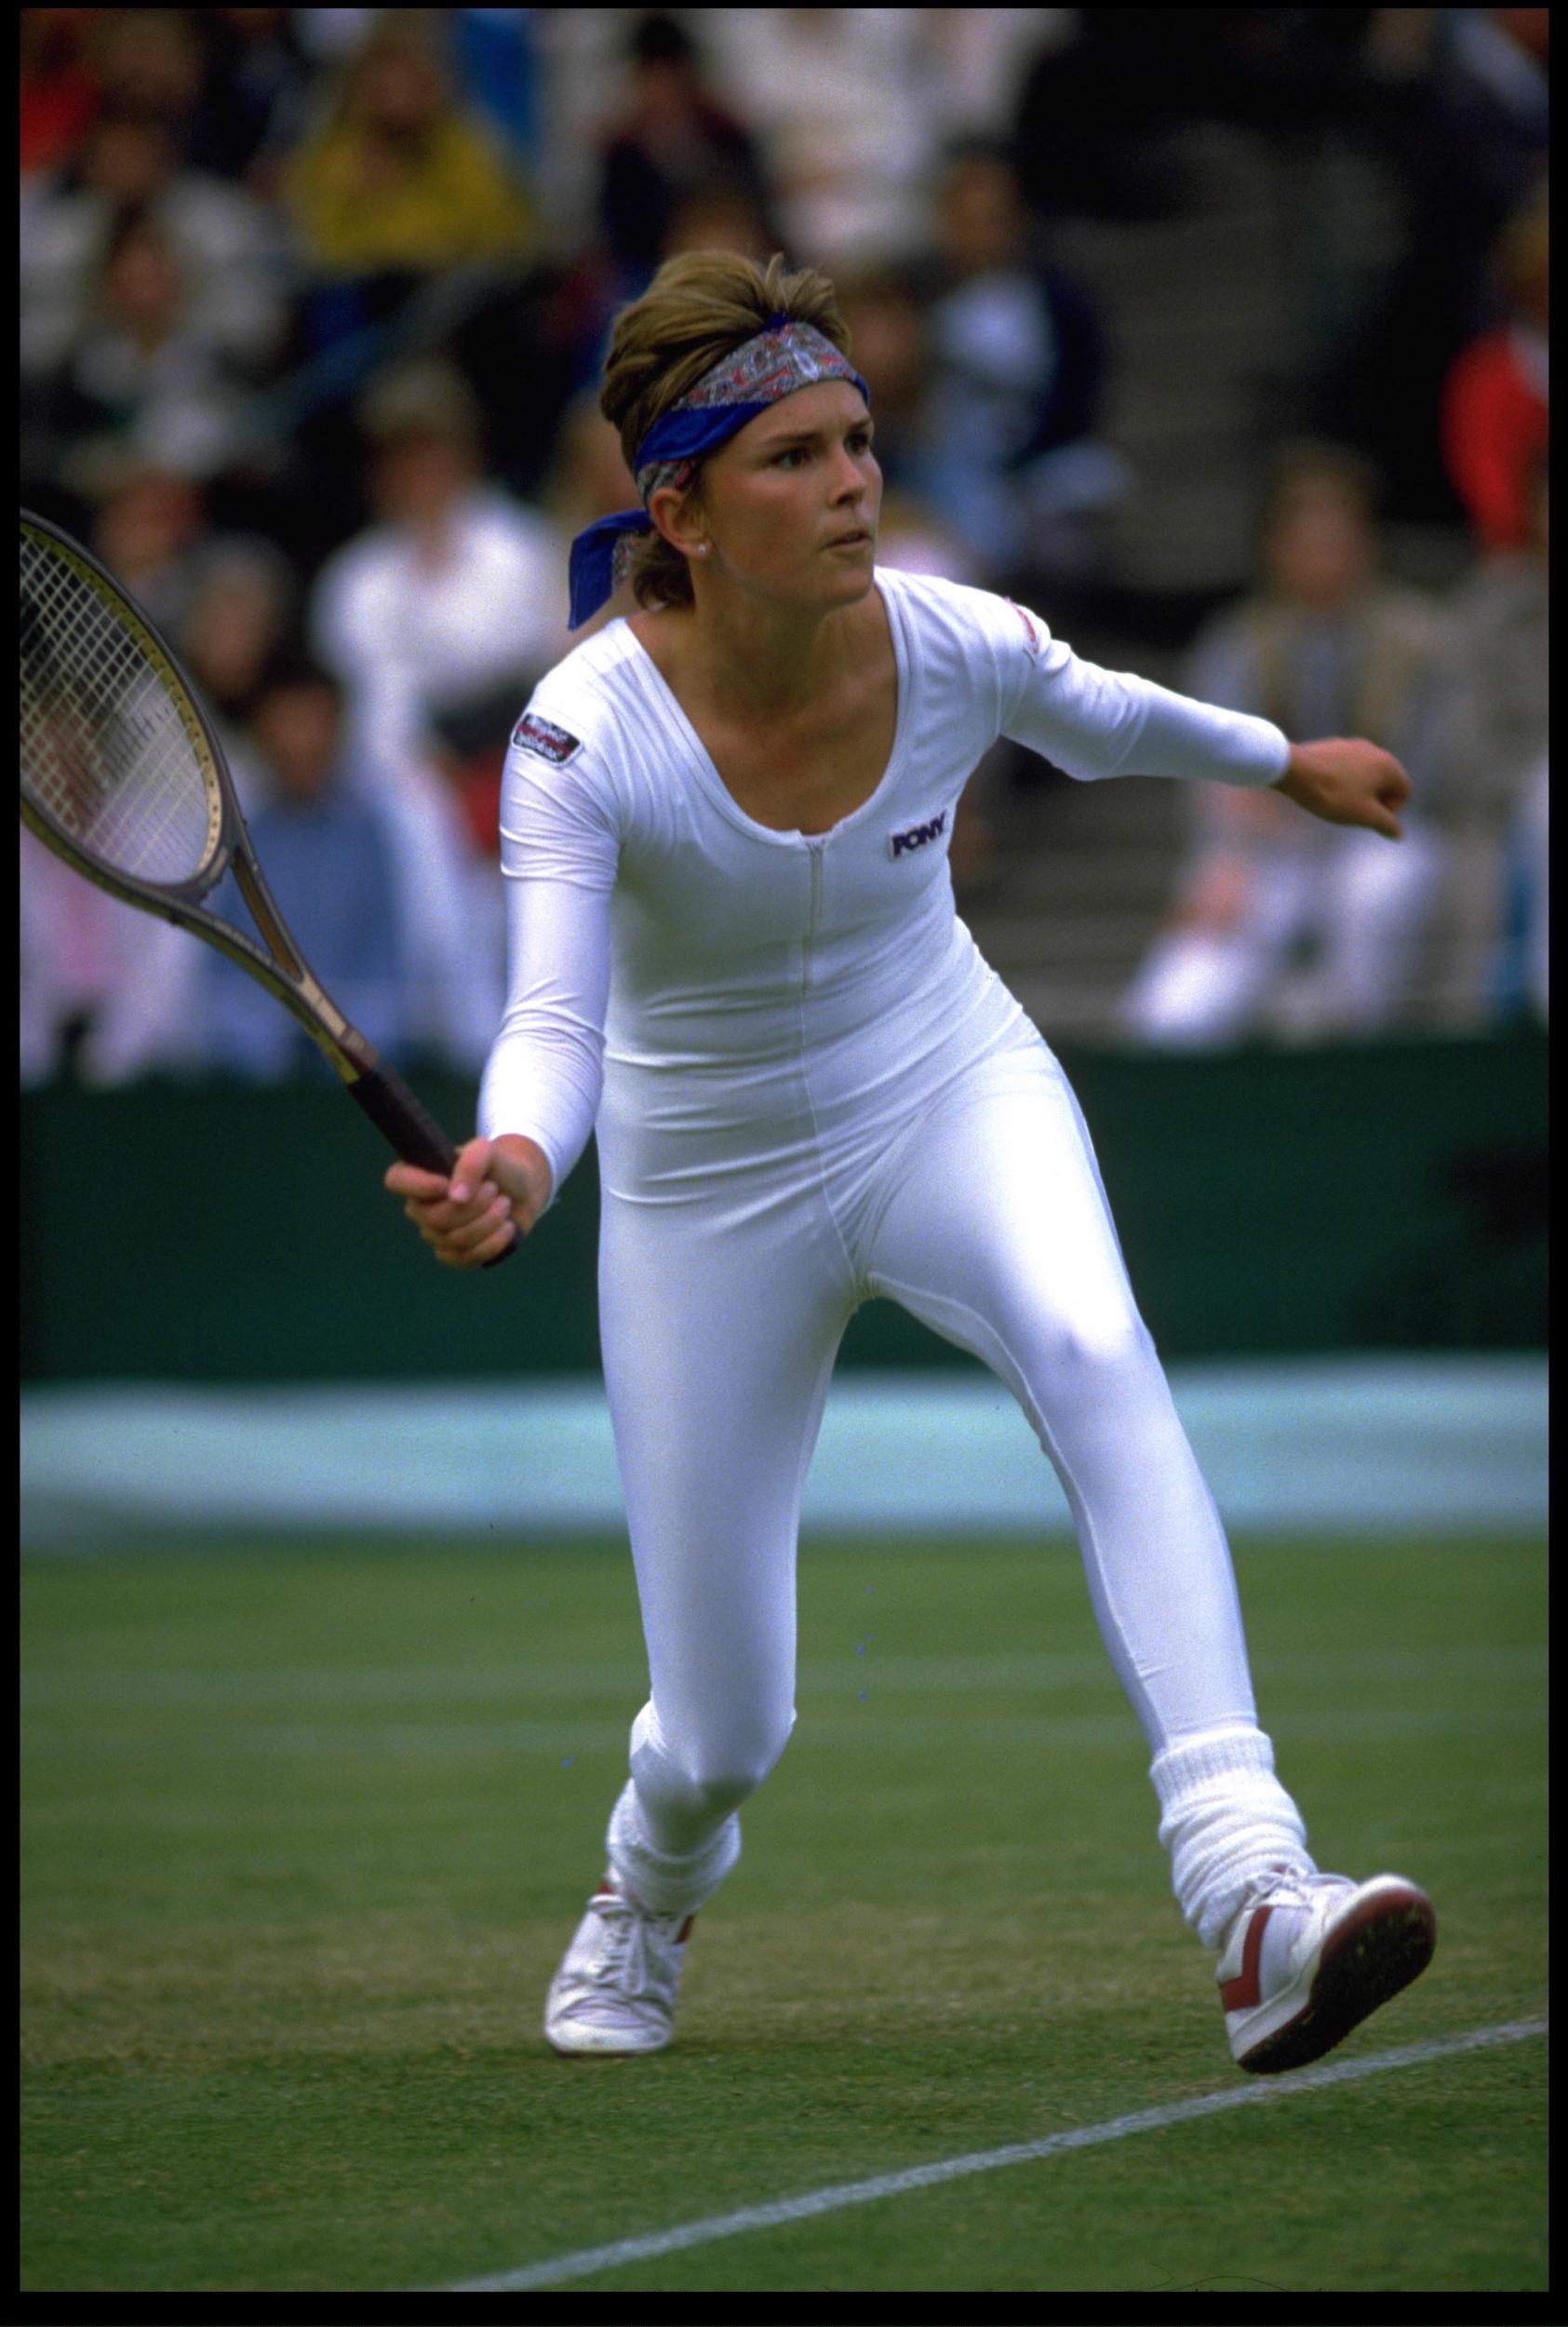 dress code for female tennis players